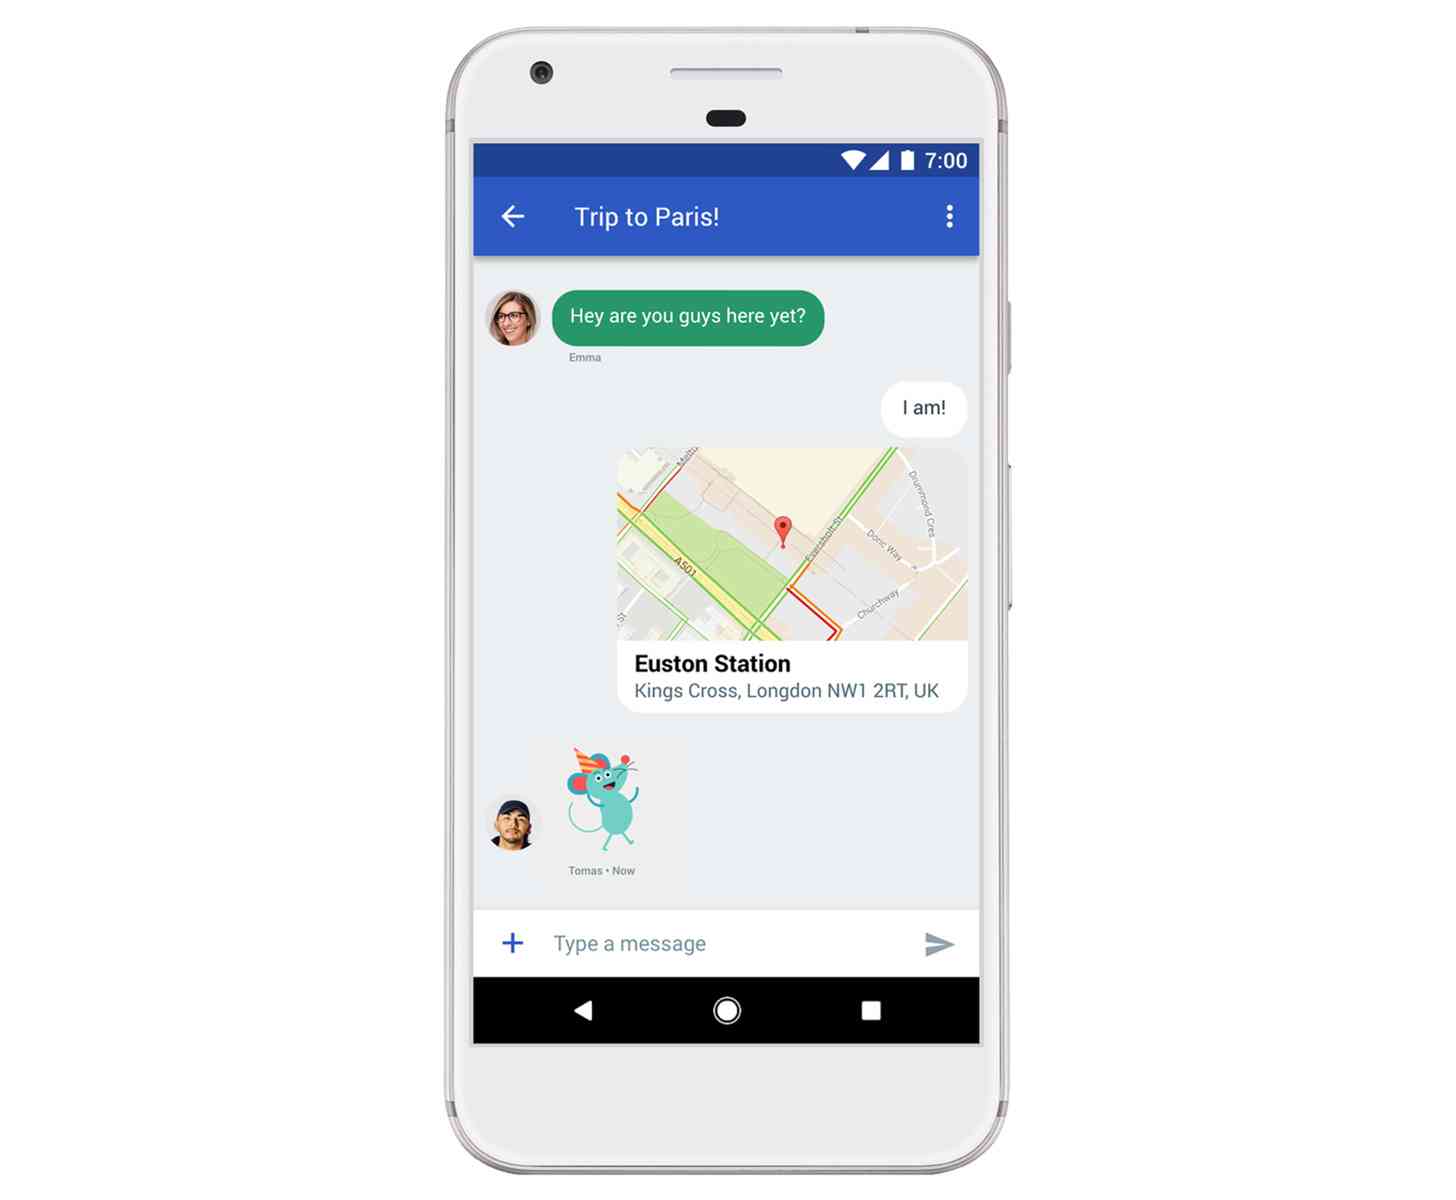 Android Messages RCS messaging